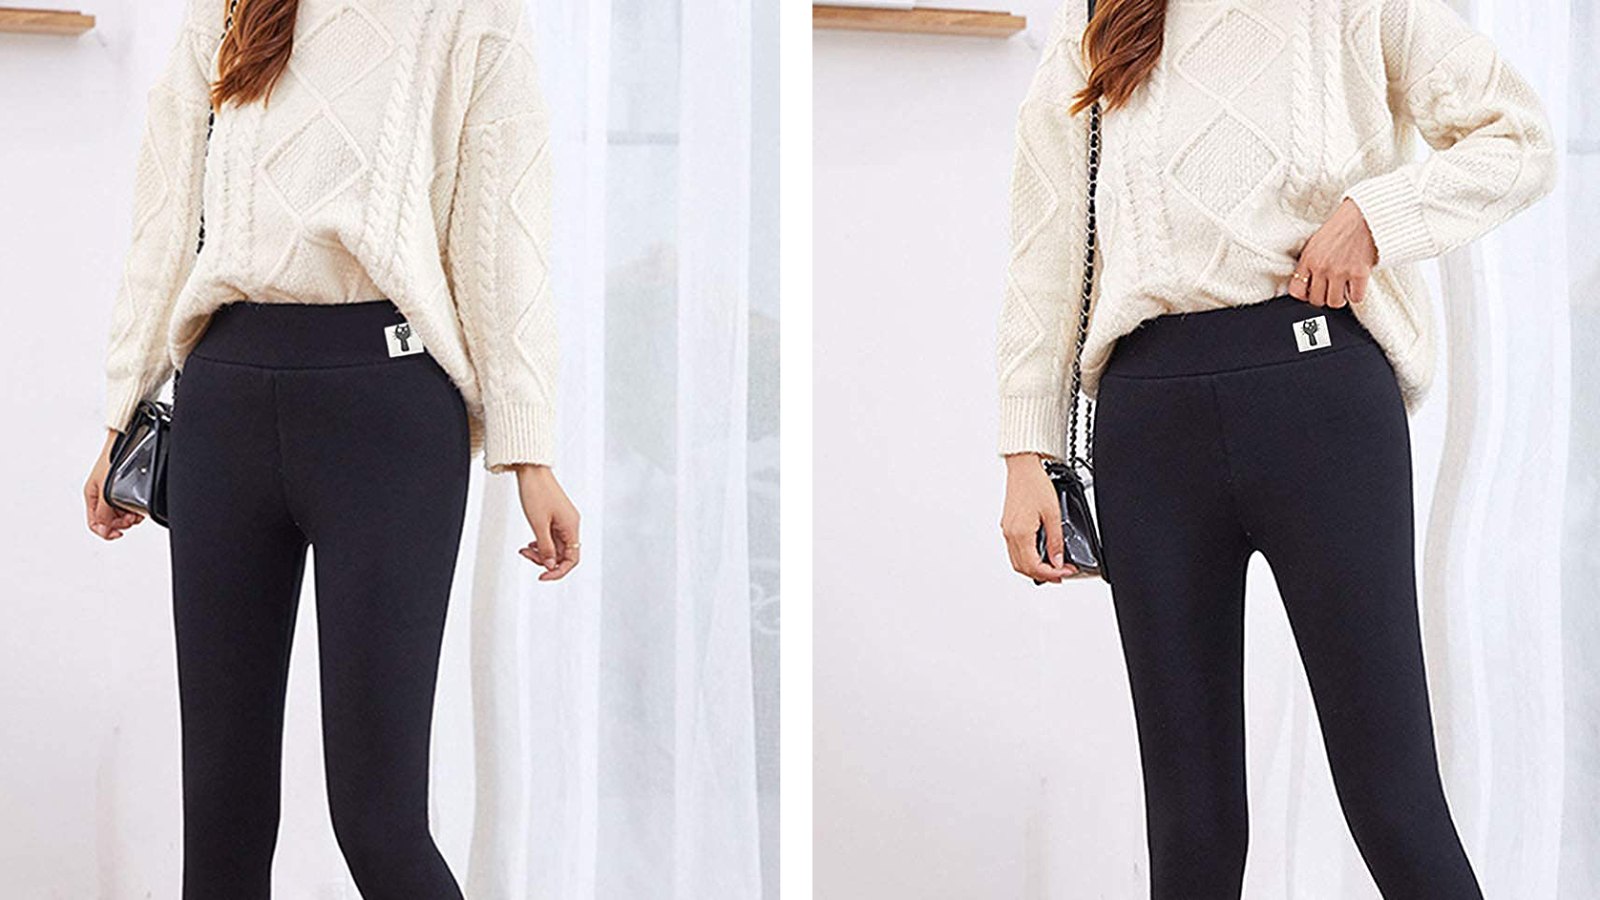 Move Over Leggings! Fleece-Lined Jeans Are What We Need Right Now